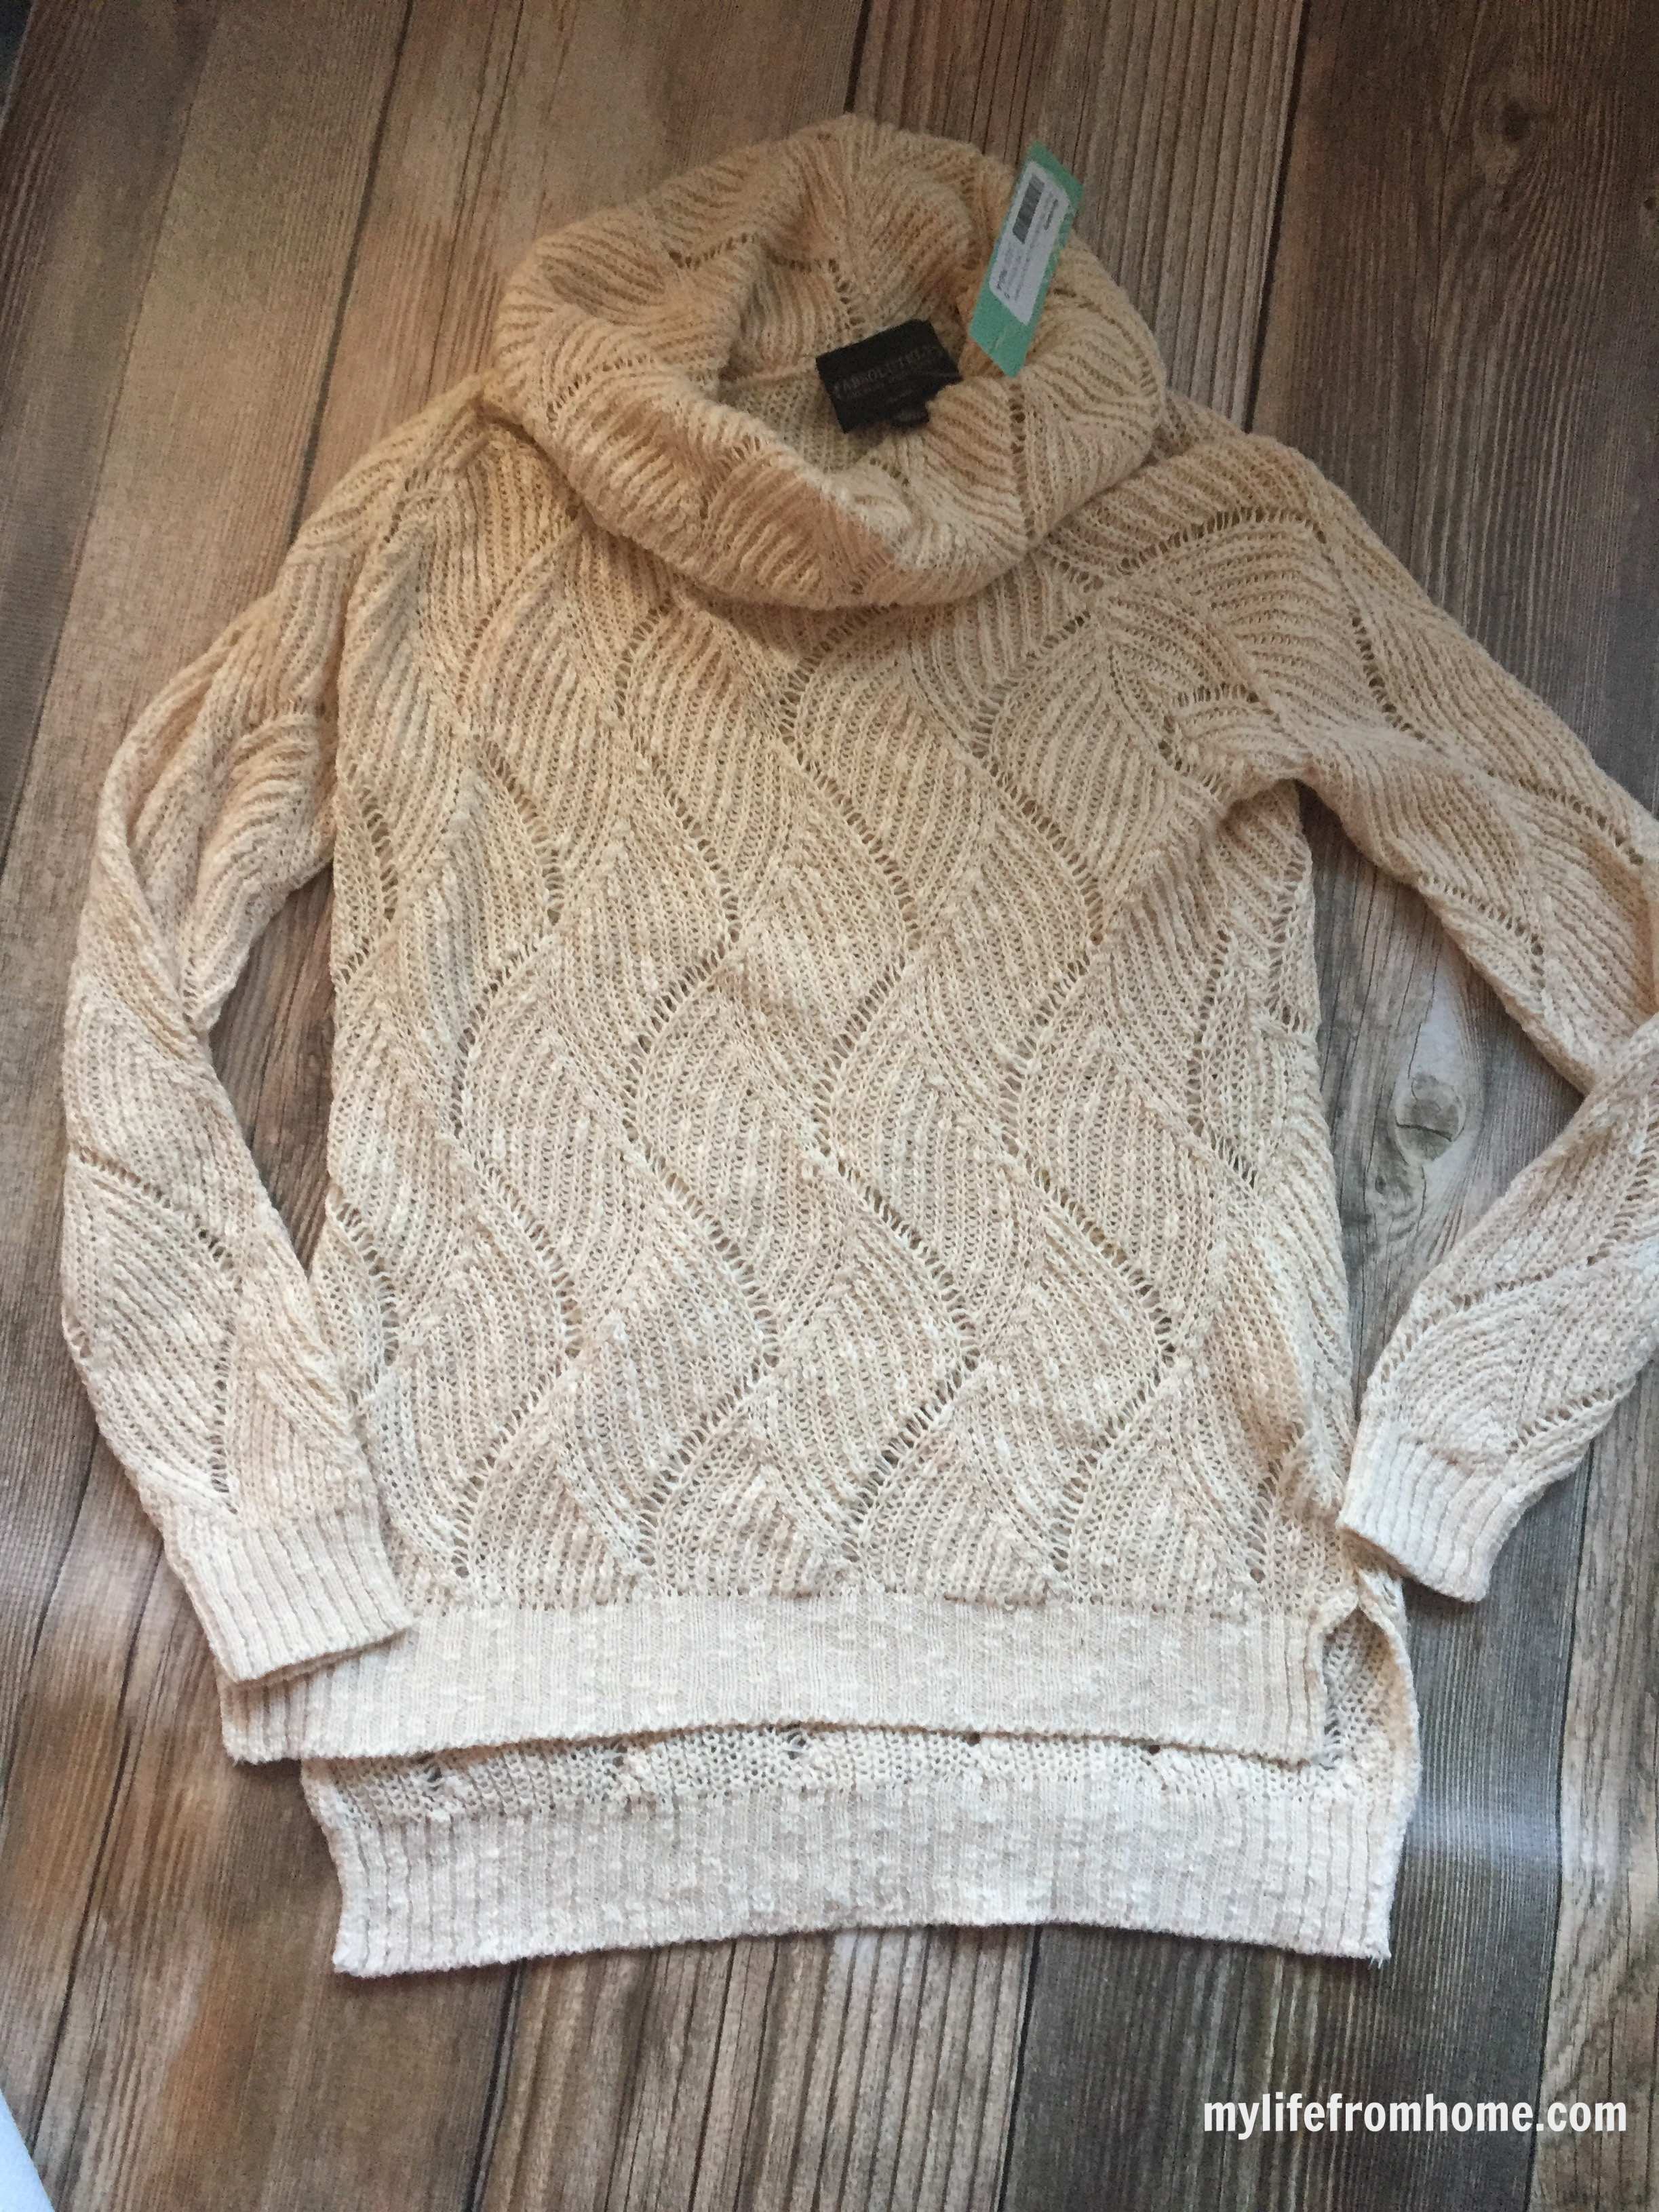 Knit Turtleneck Sweater by www.whitecottagehomeandliving.com